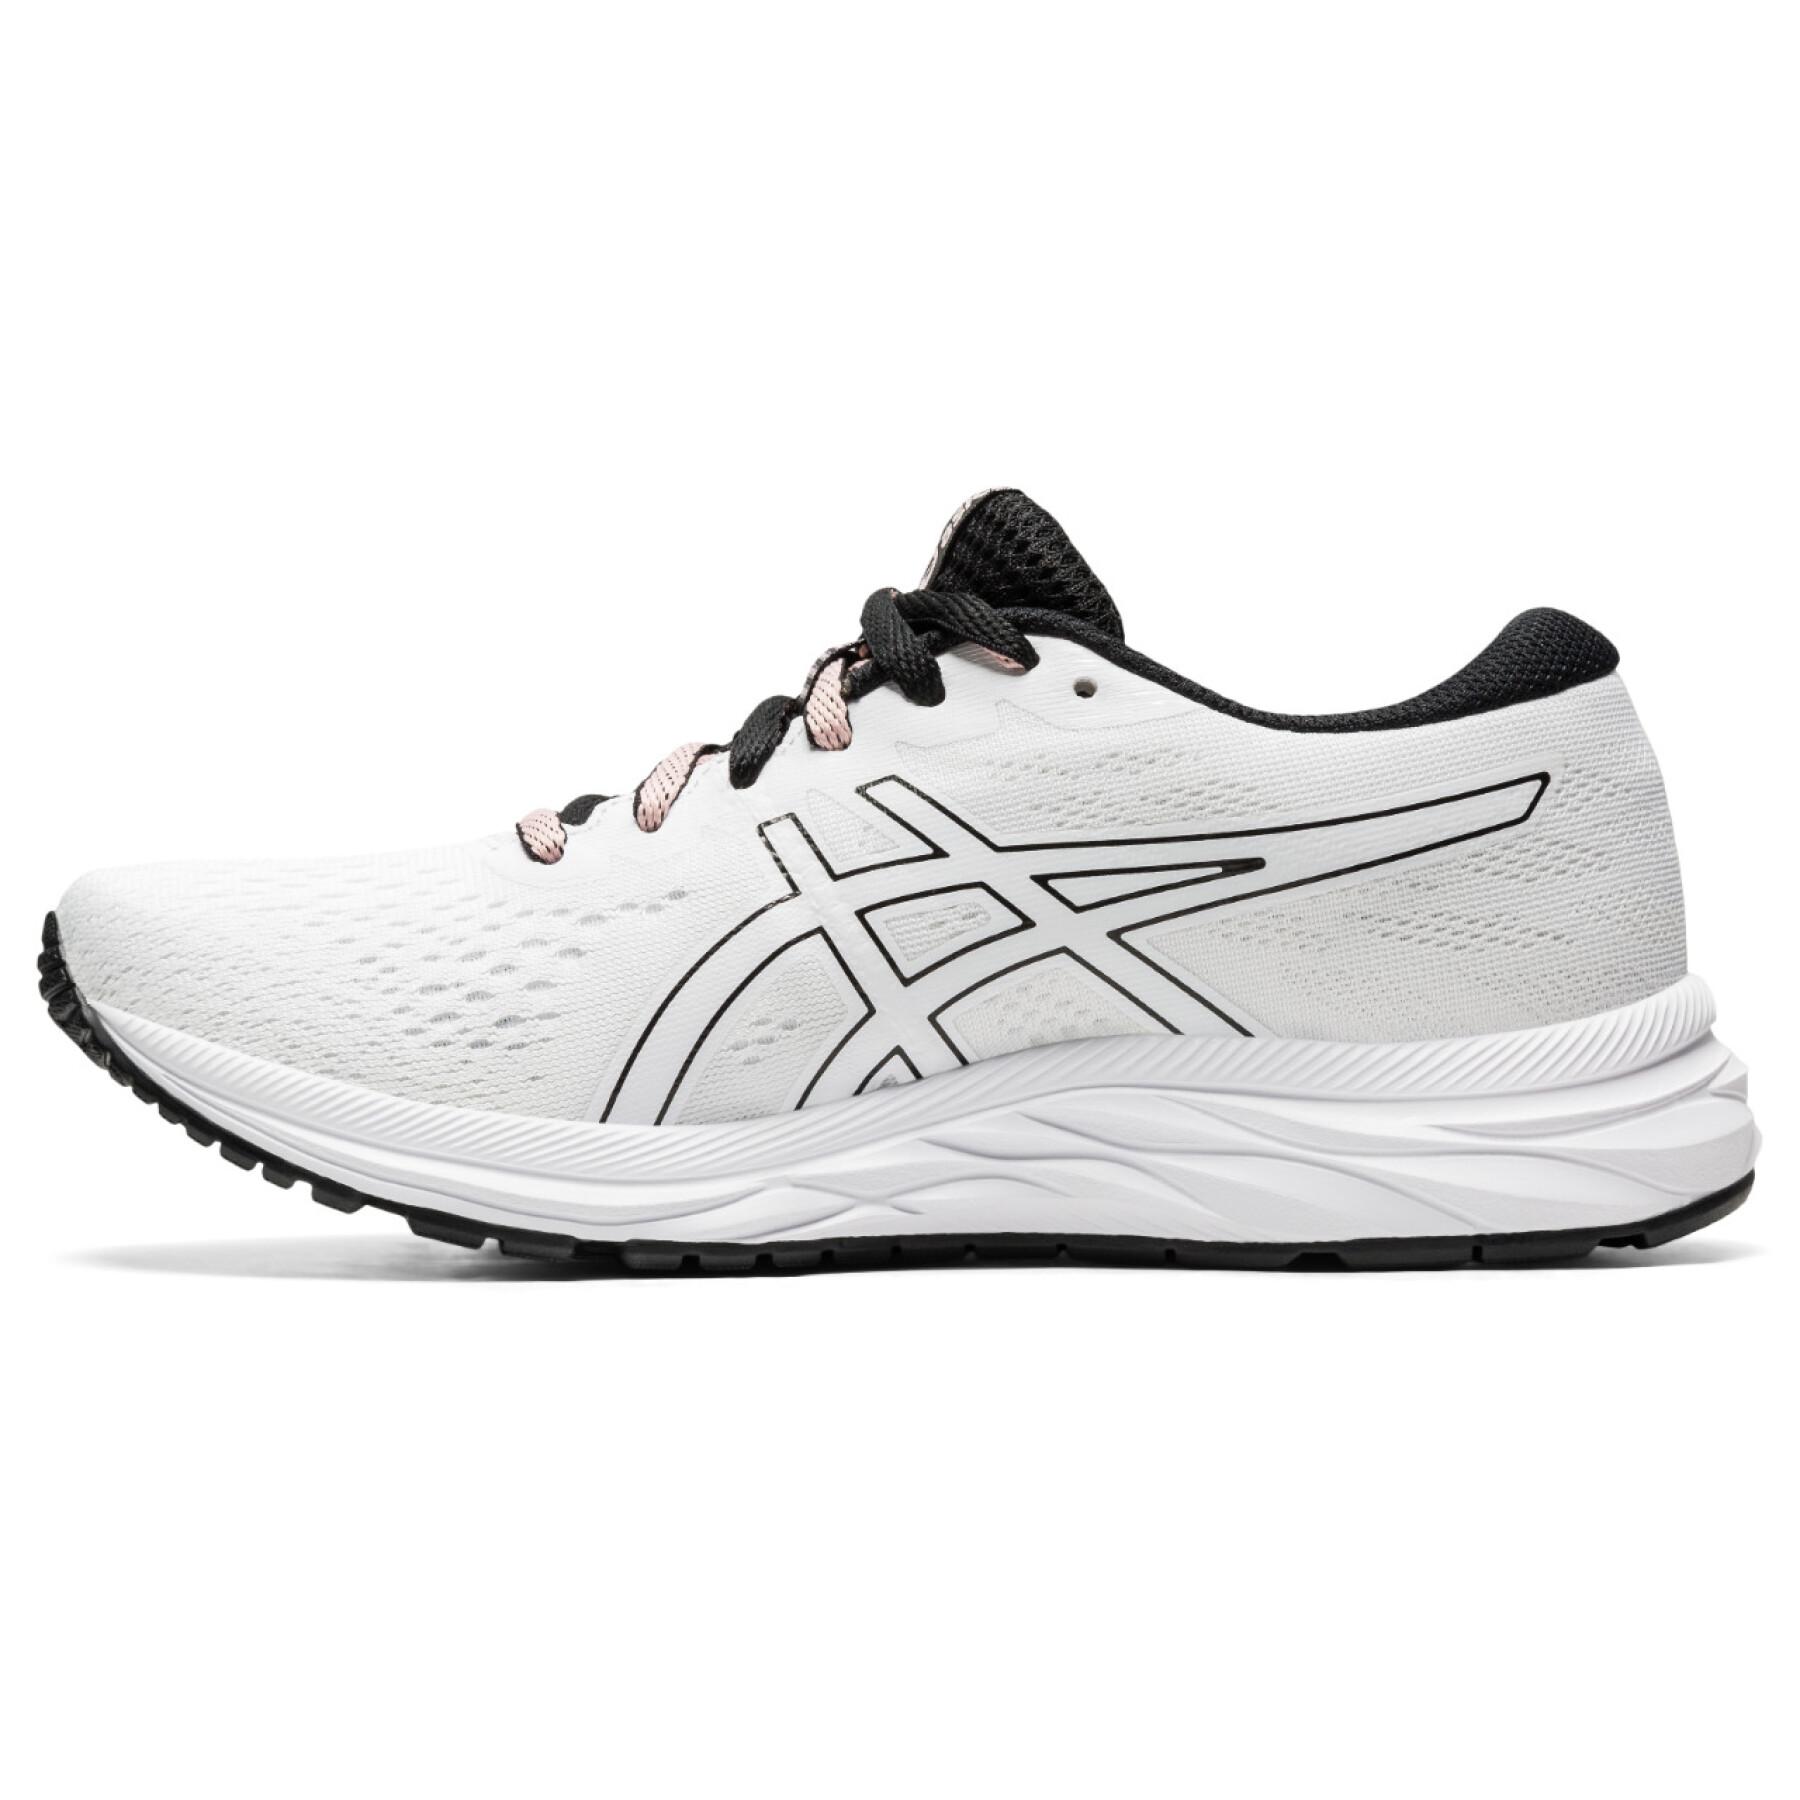 Women's shoes Asics Gel-Excite 7